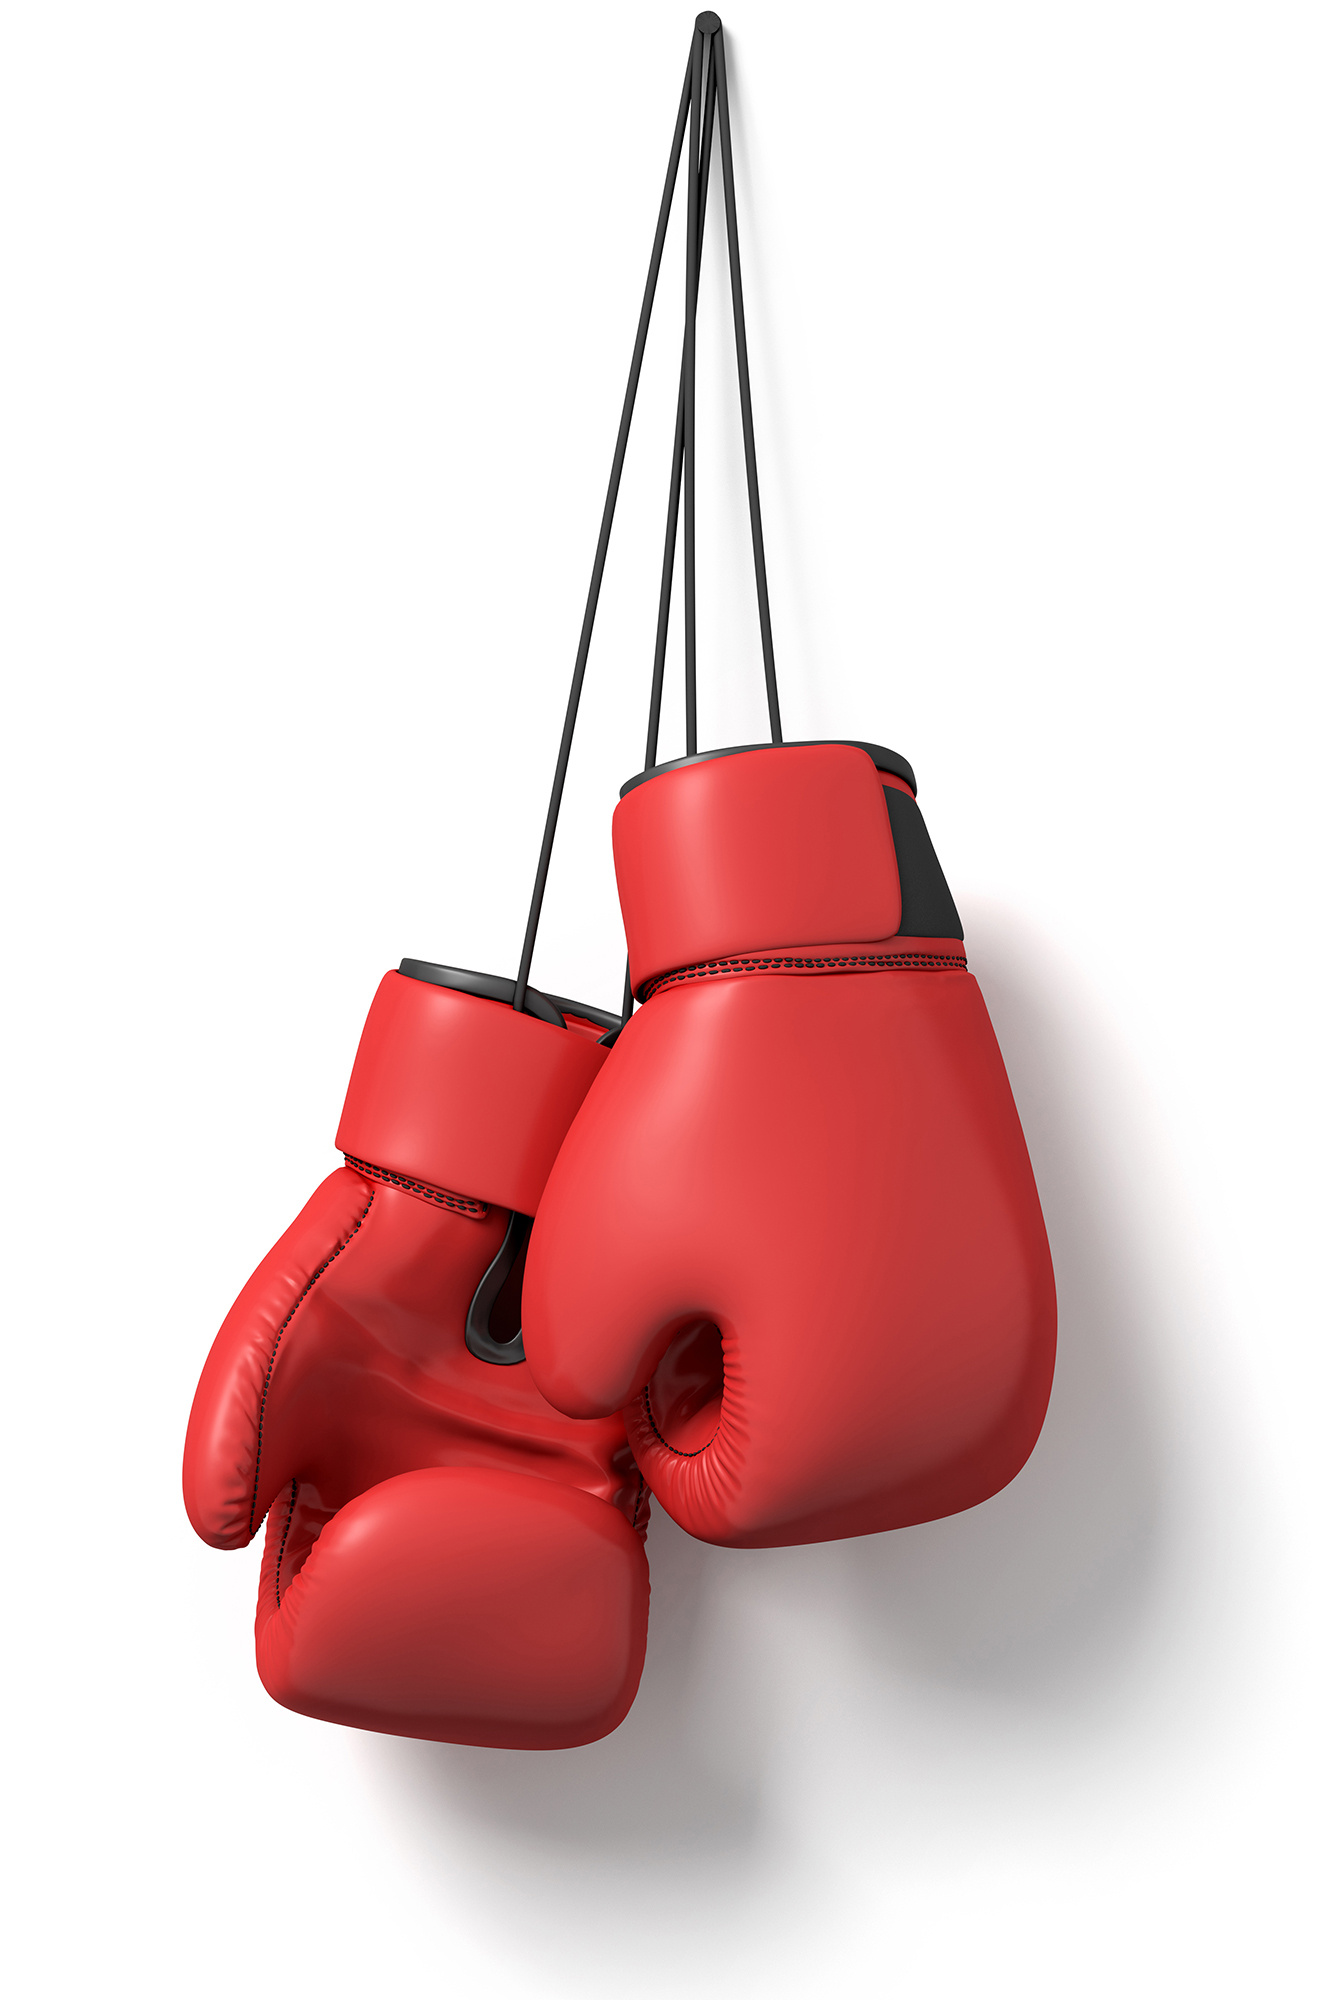 Hanging boxing gloves, Red boxing gloves, Black string, White background, 1330x2000 HD Handy